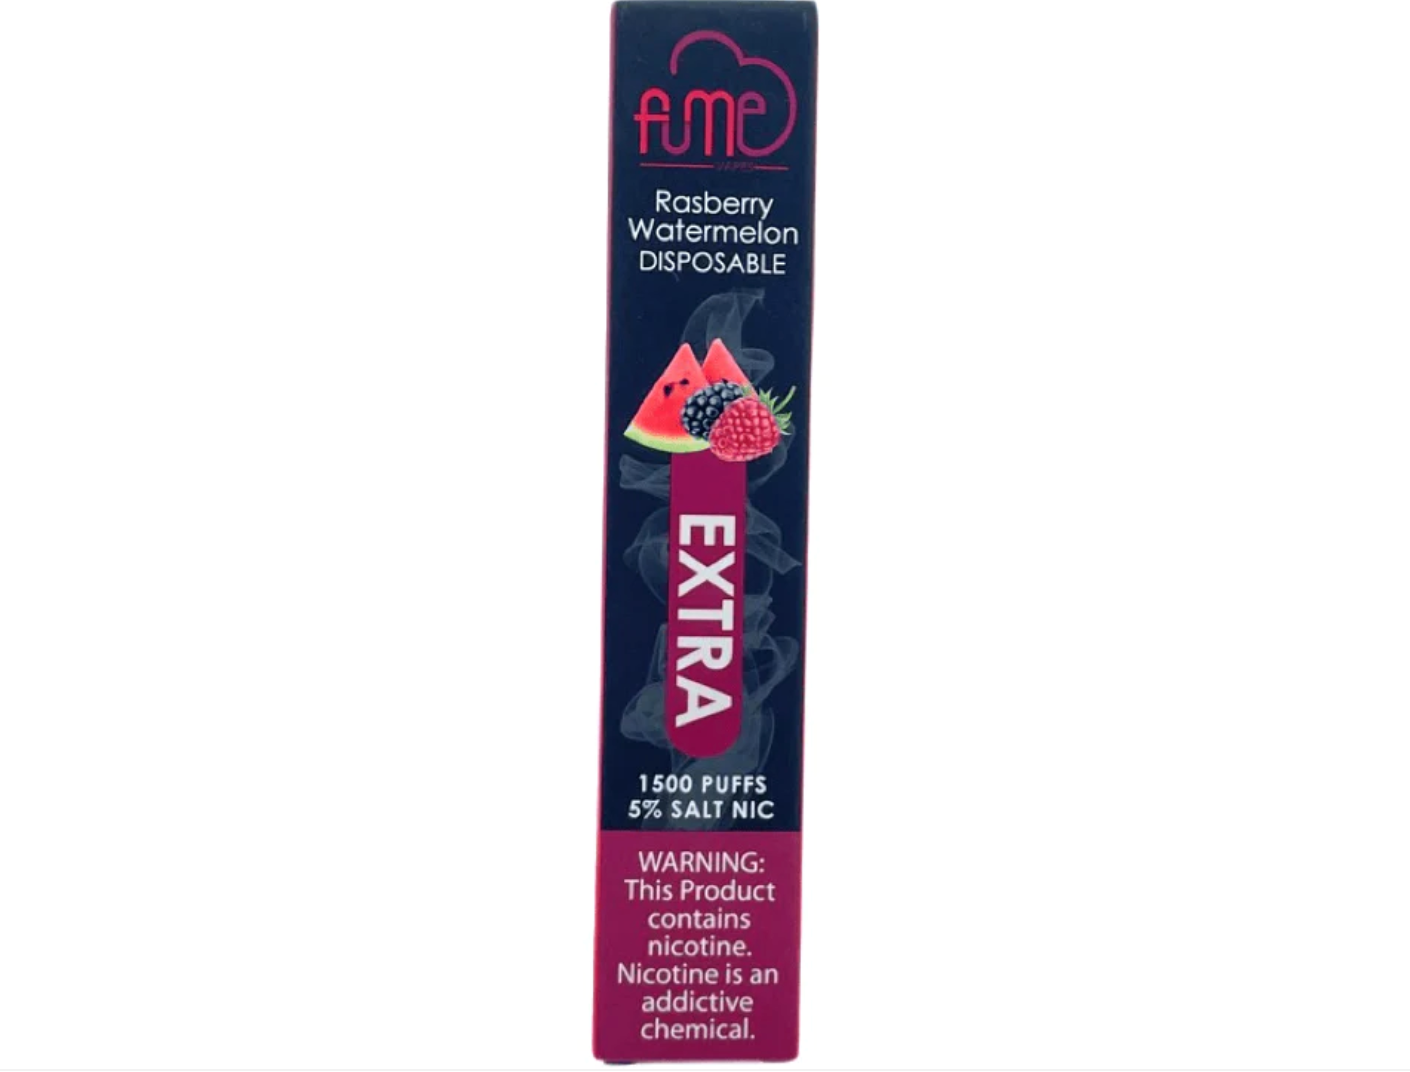 https://thesmokybox.com/products/rasberry-watermelon-fume-extra-disposable-vape